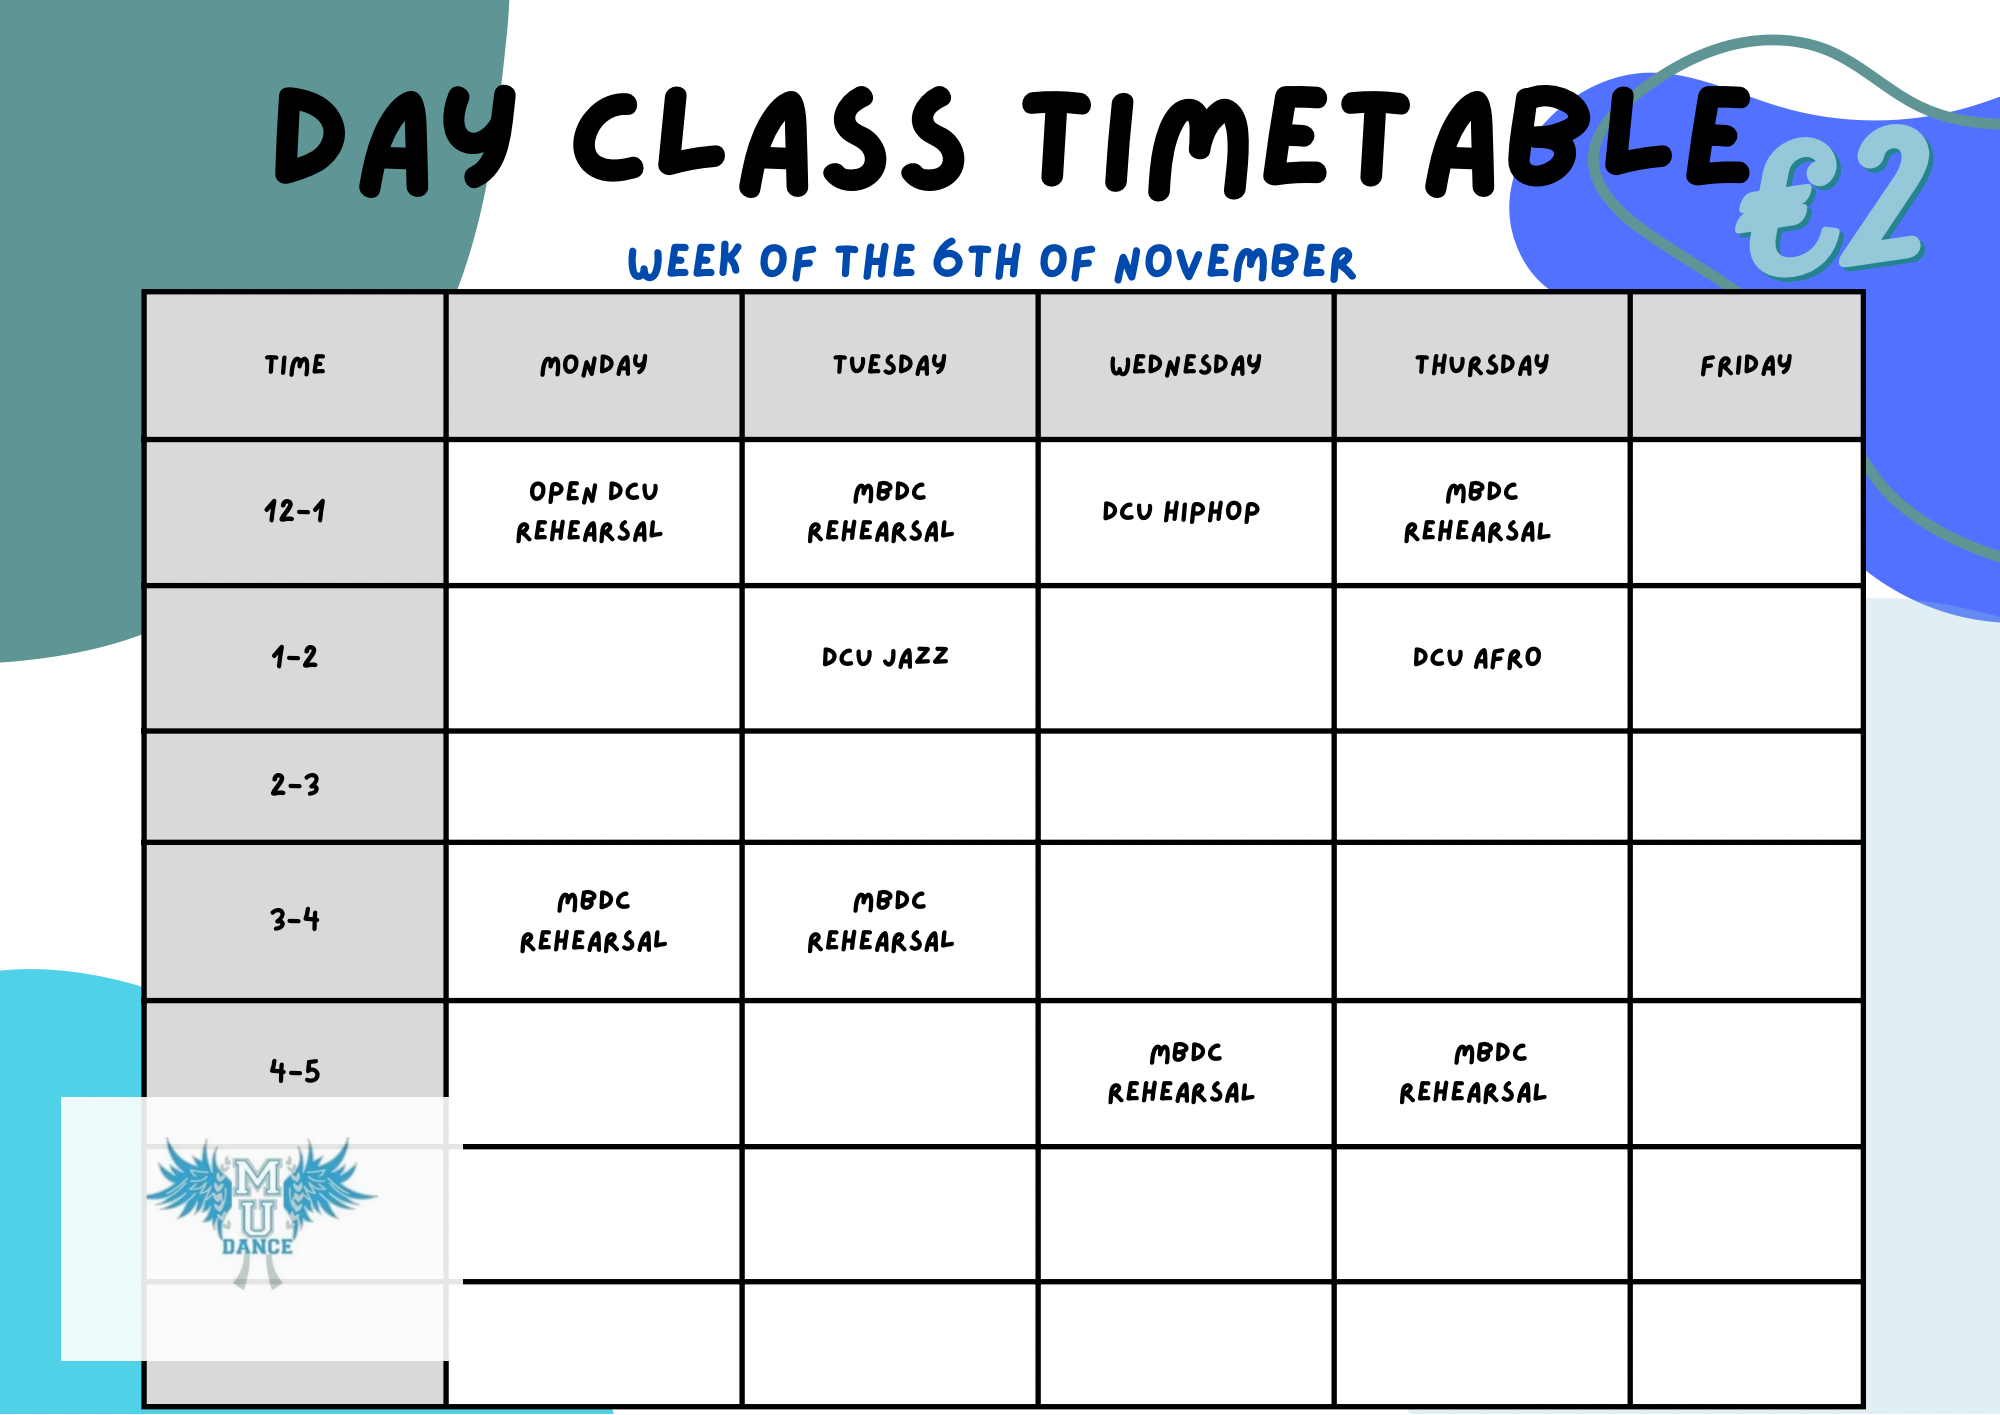 Class Timetable 